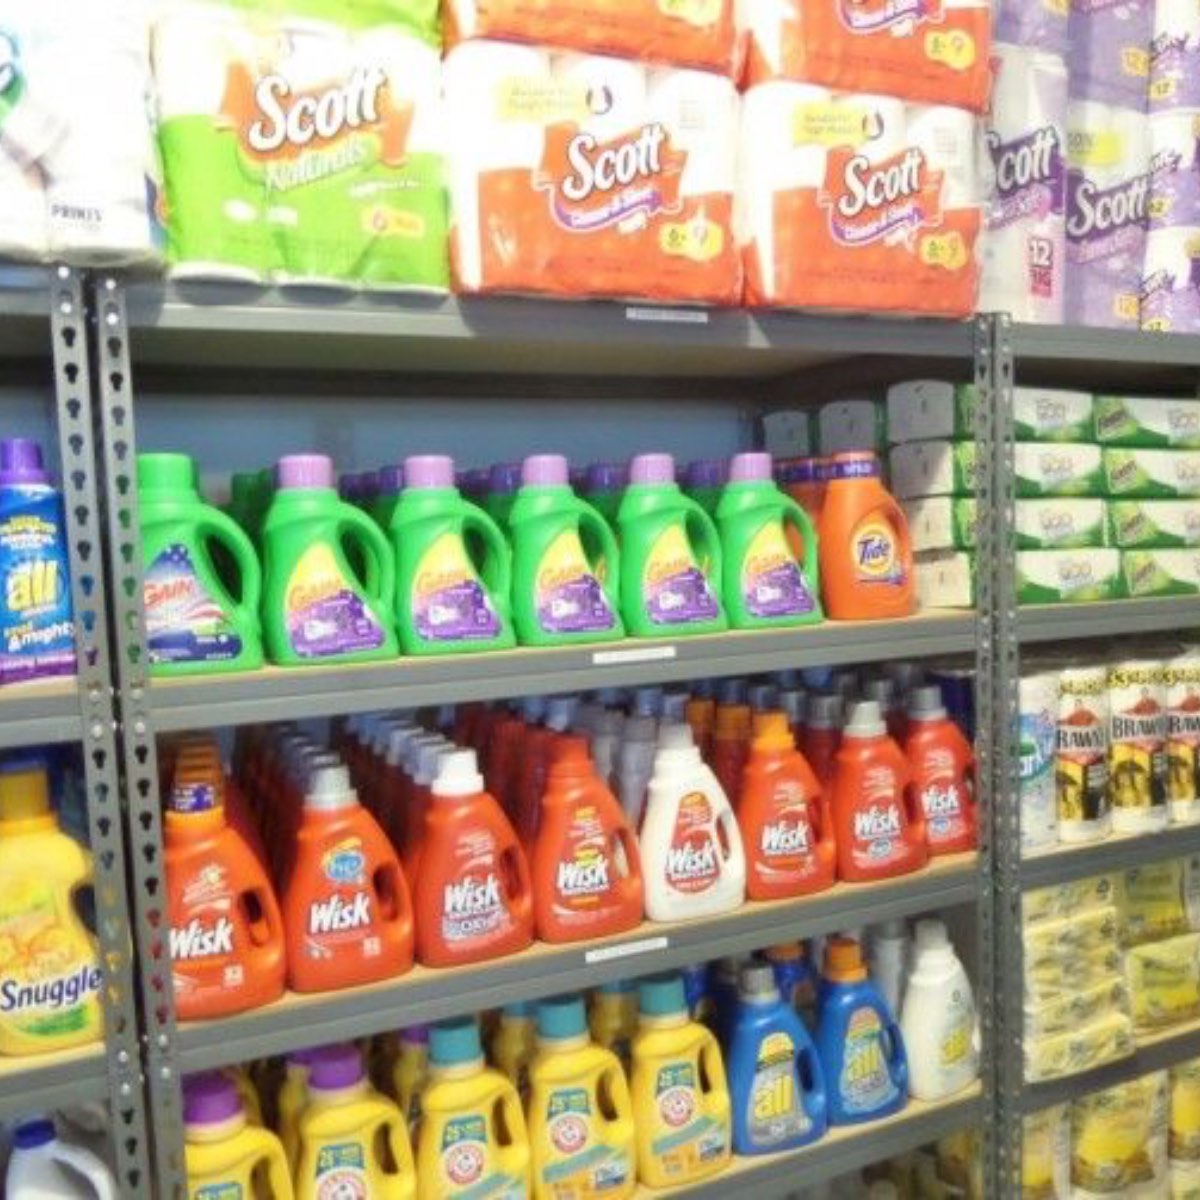 30 Common Mistakes to Avoid When Stockpiling Supplies